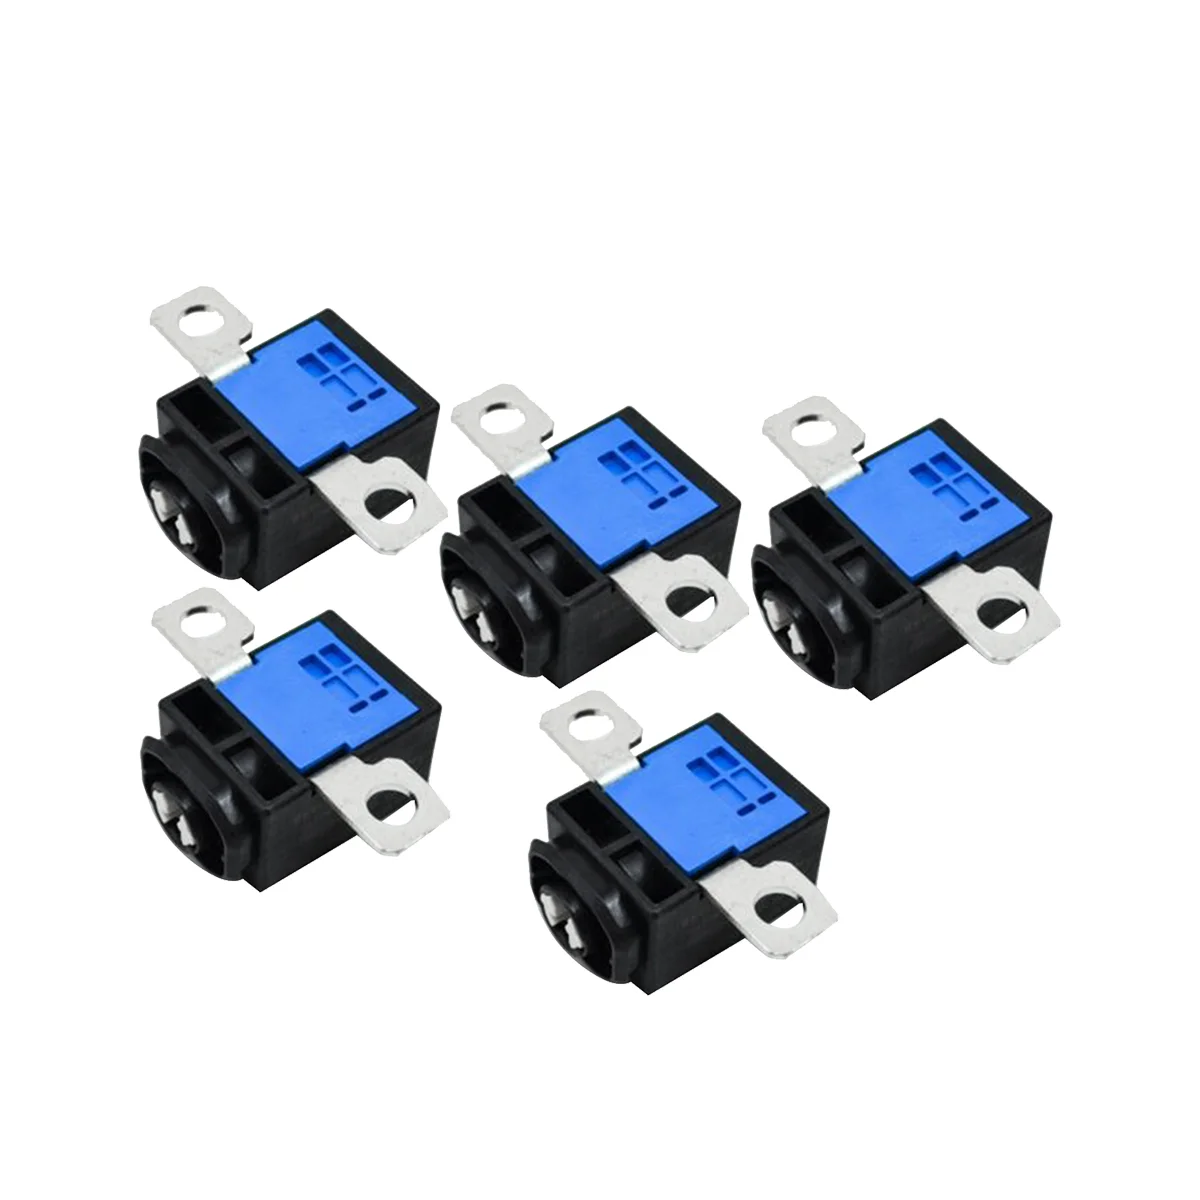 

5PCS N000000006984 Crash Battery Security Disconnect Fuse Pyroswitch for Mercedes Benz VITO W447 N000000000006984